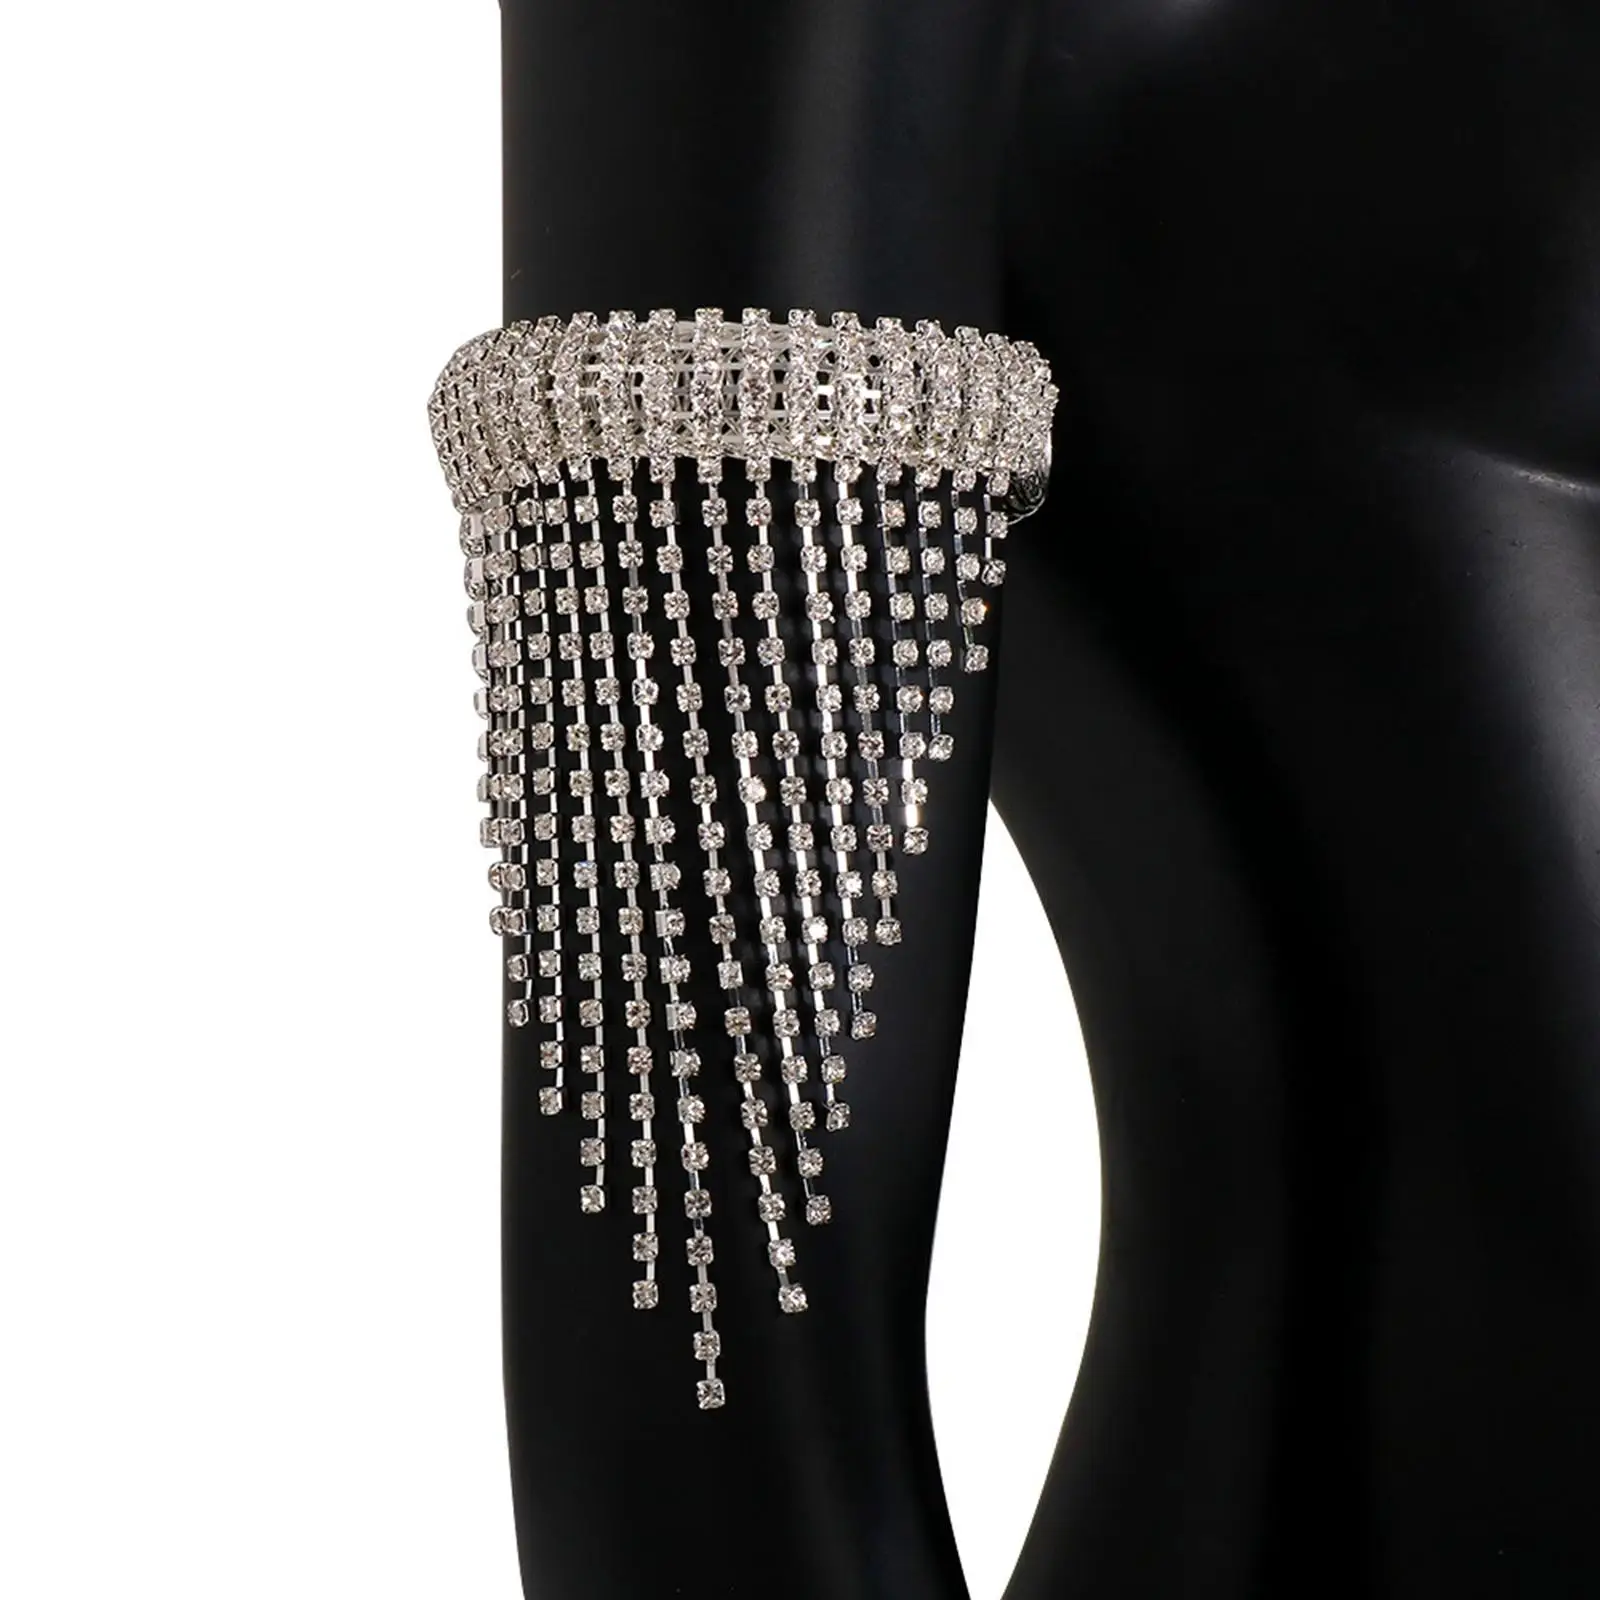 Upper Arm Cuff Bracelet Tassel Chain Rhinestone Costume Accessories Silver Arm Bangle Jewelry Body Chain for Holiday Party